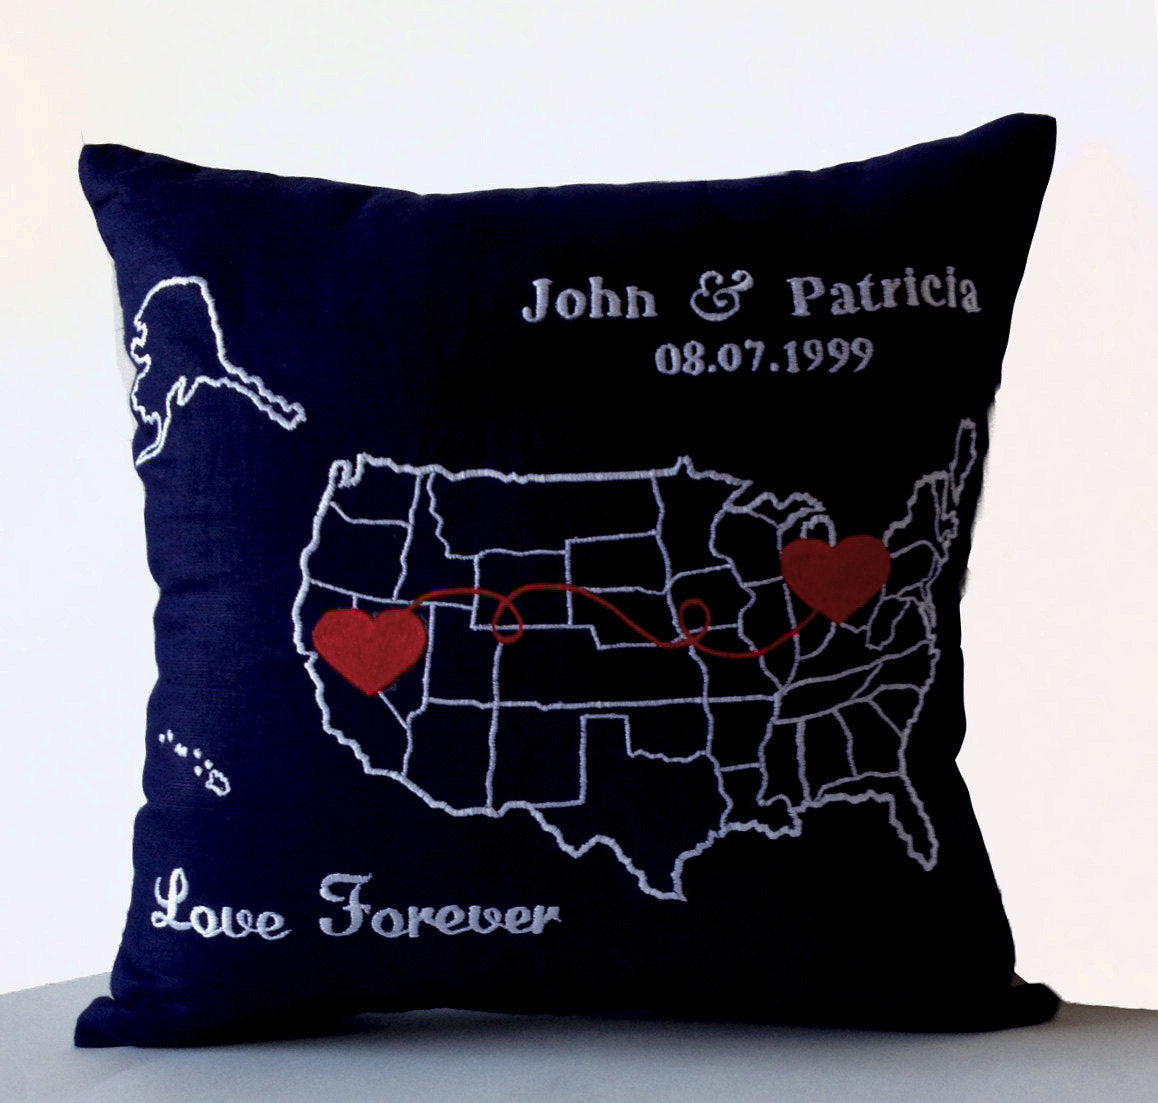 Amore Beaute USA map pillow cover with hearts, long distance relationship quotes symbols, names, and date on US or world map.